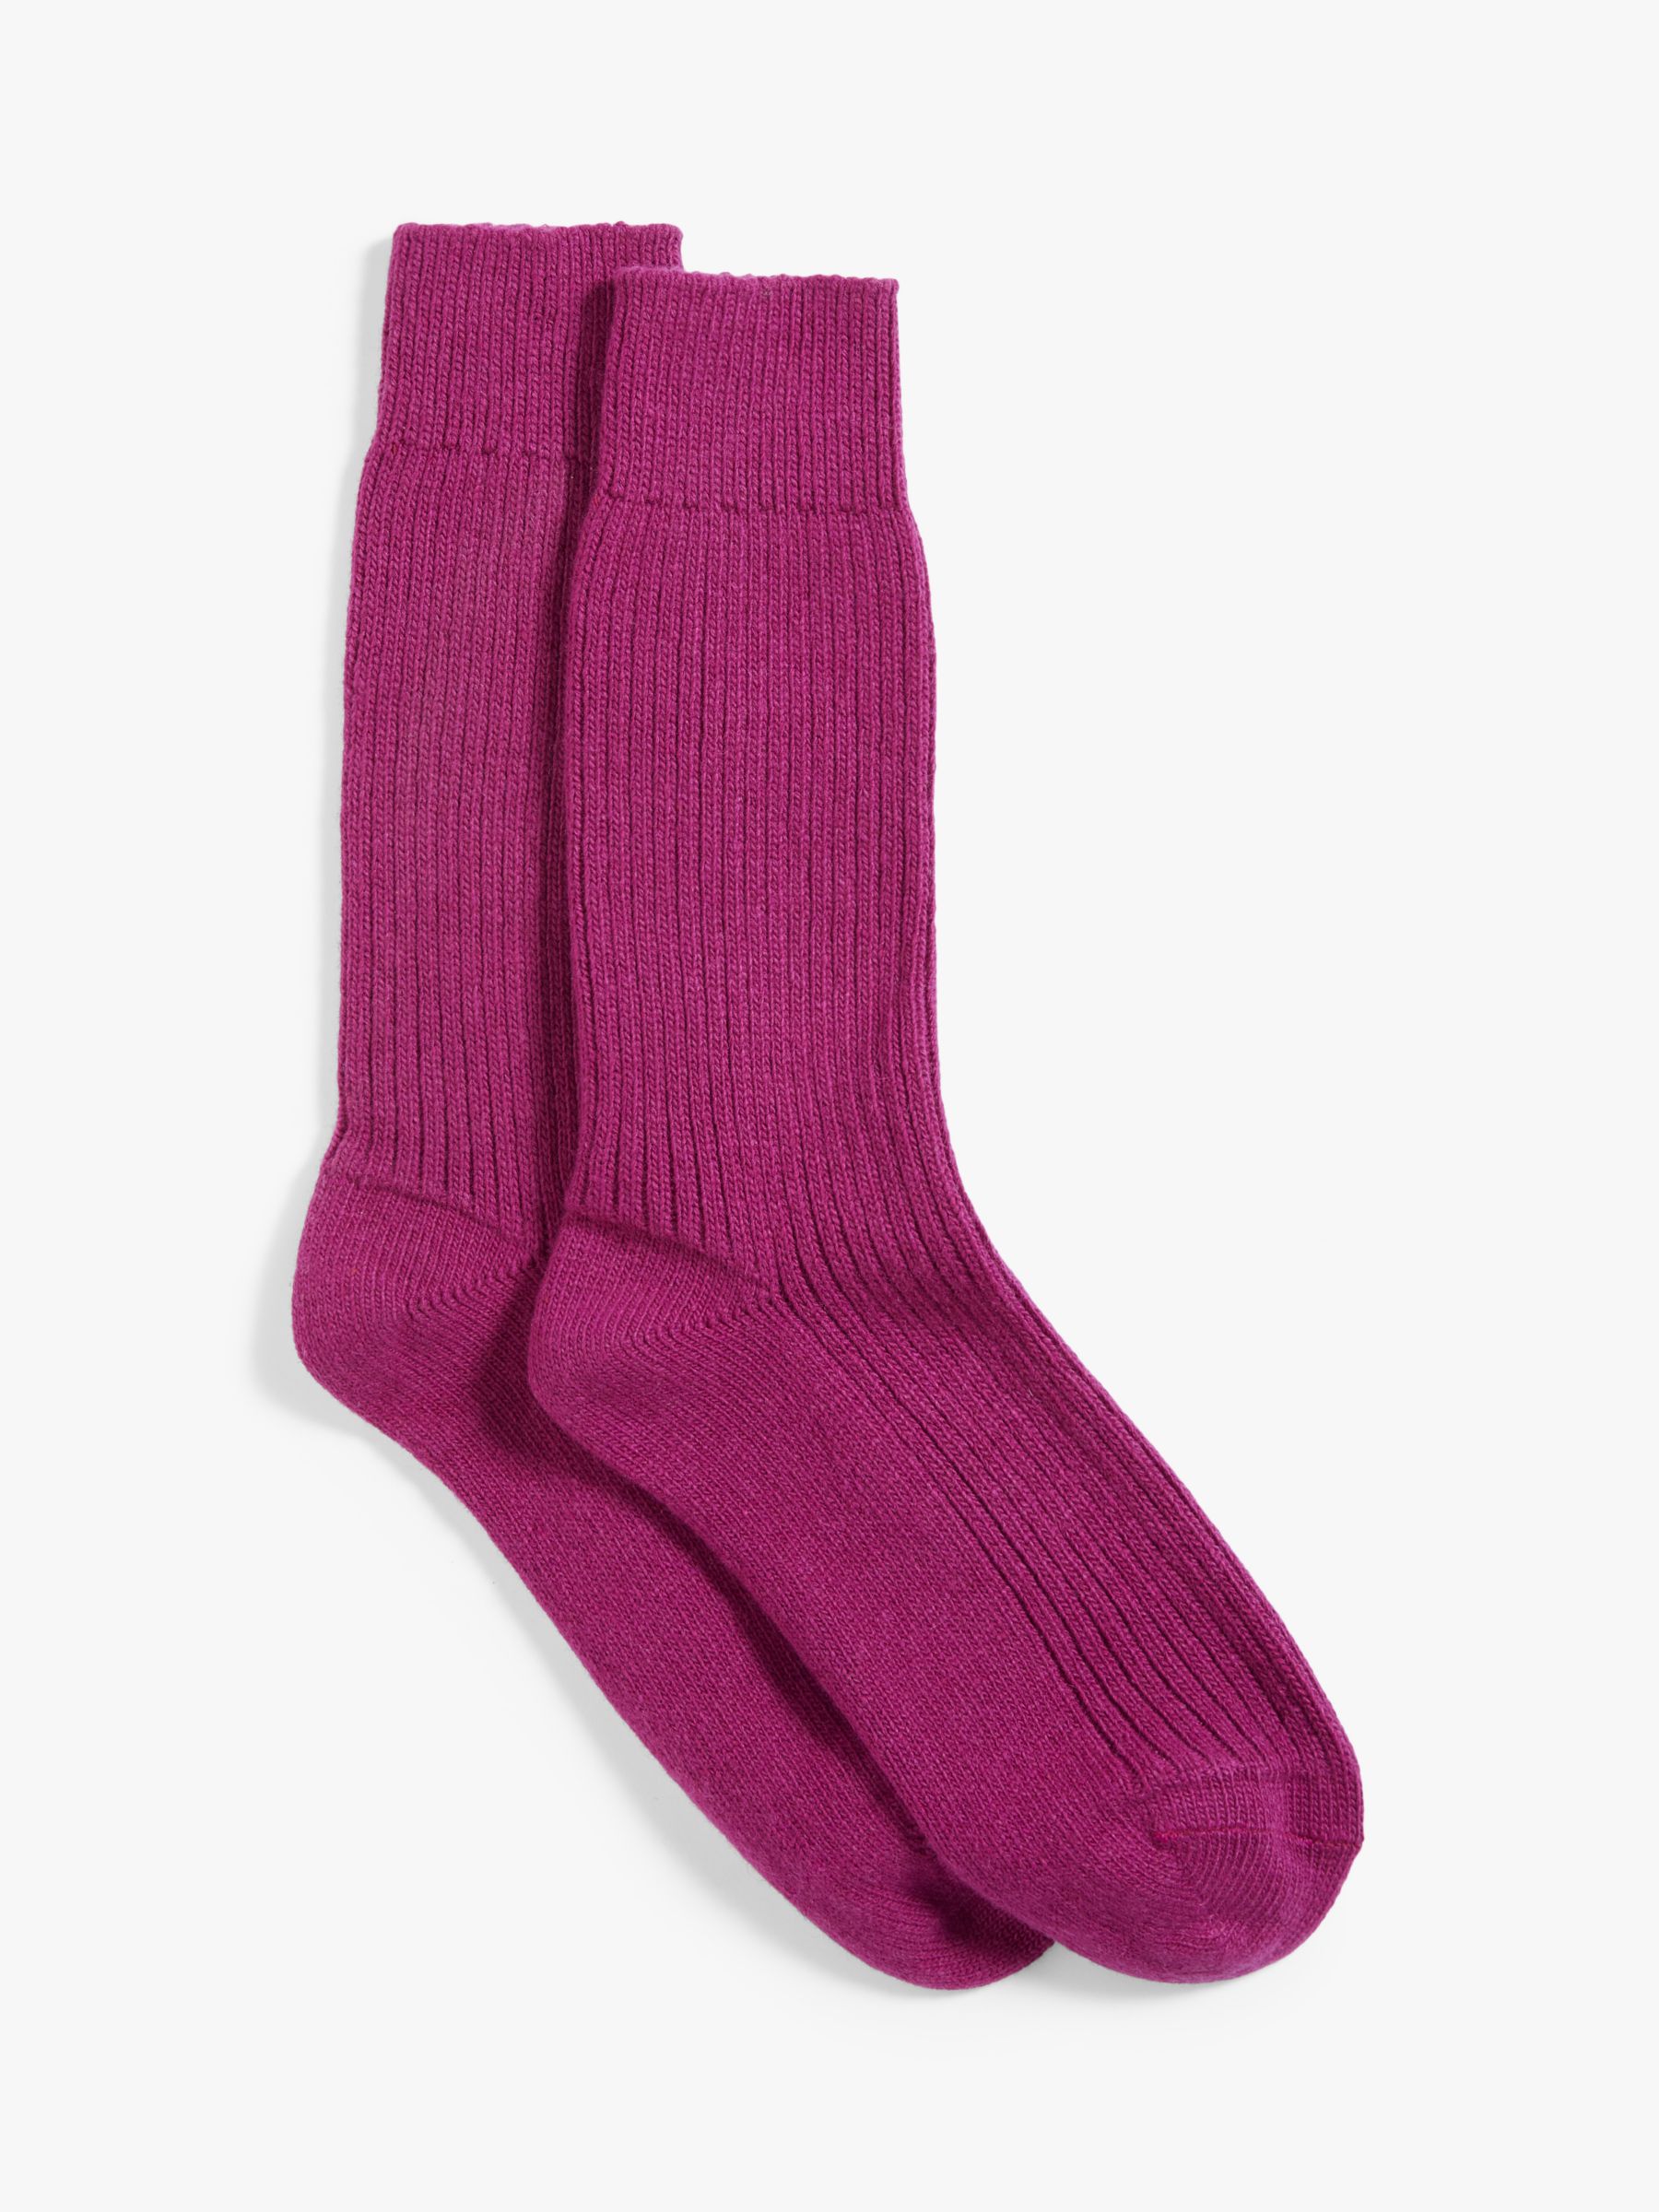 John Lewis & Partners Cashmere Bed Ankle Socks, Red Berry at John Lewis ...